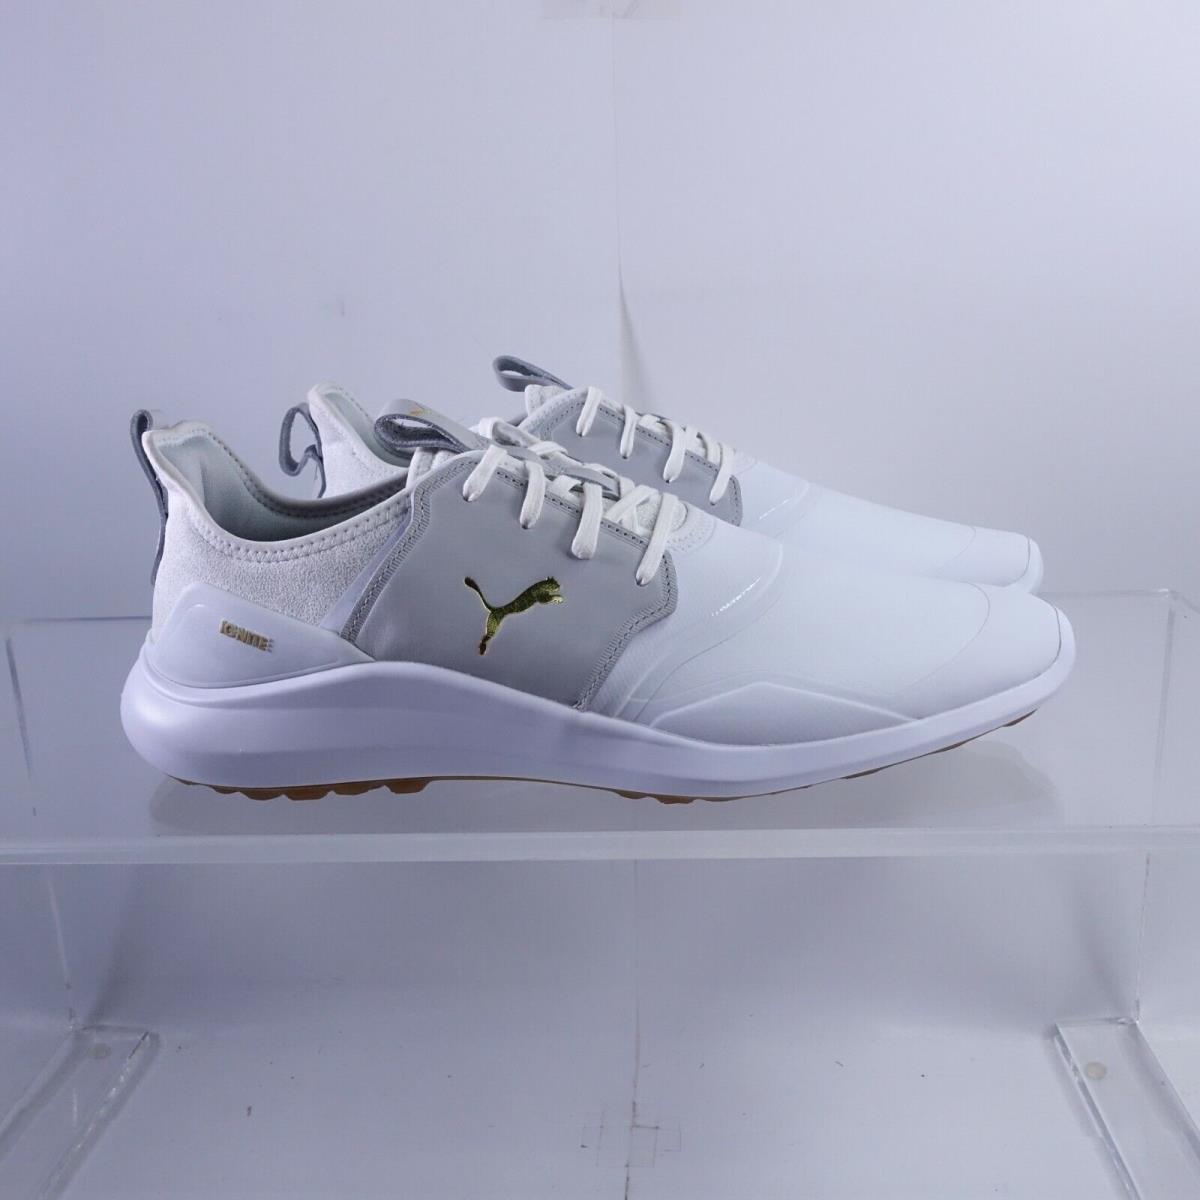 Size 7 Men`s / Women`s 8.5 Puma Ignite Nxt Crafted Waterproof Golf Shoes White